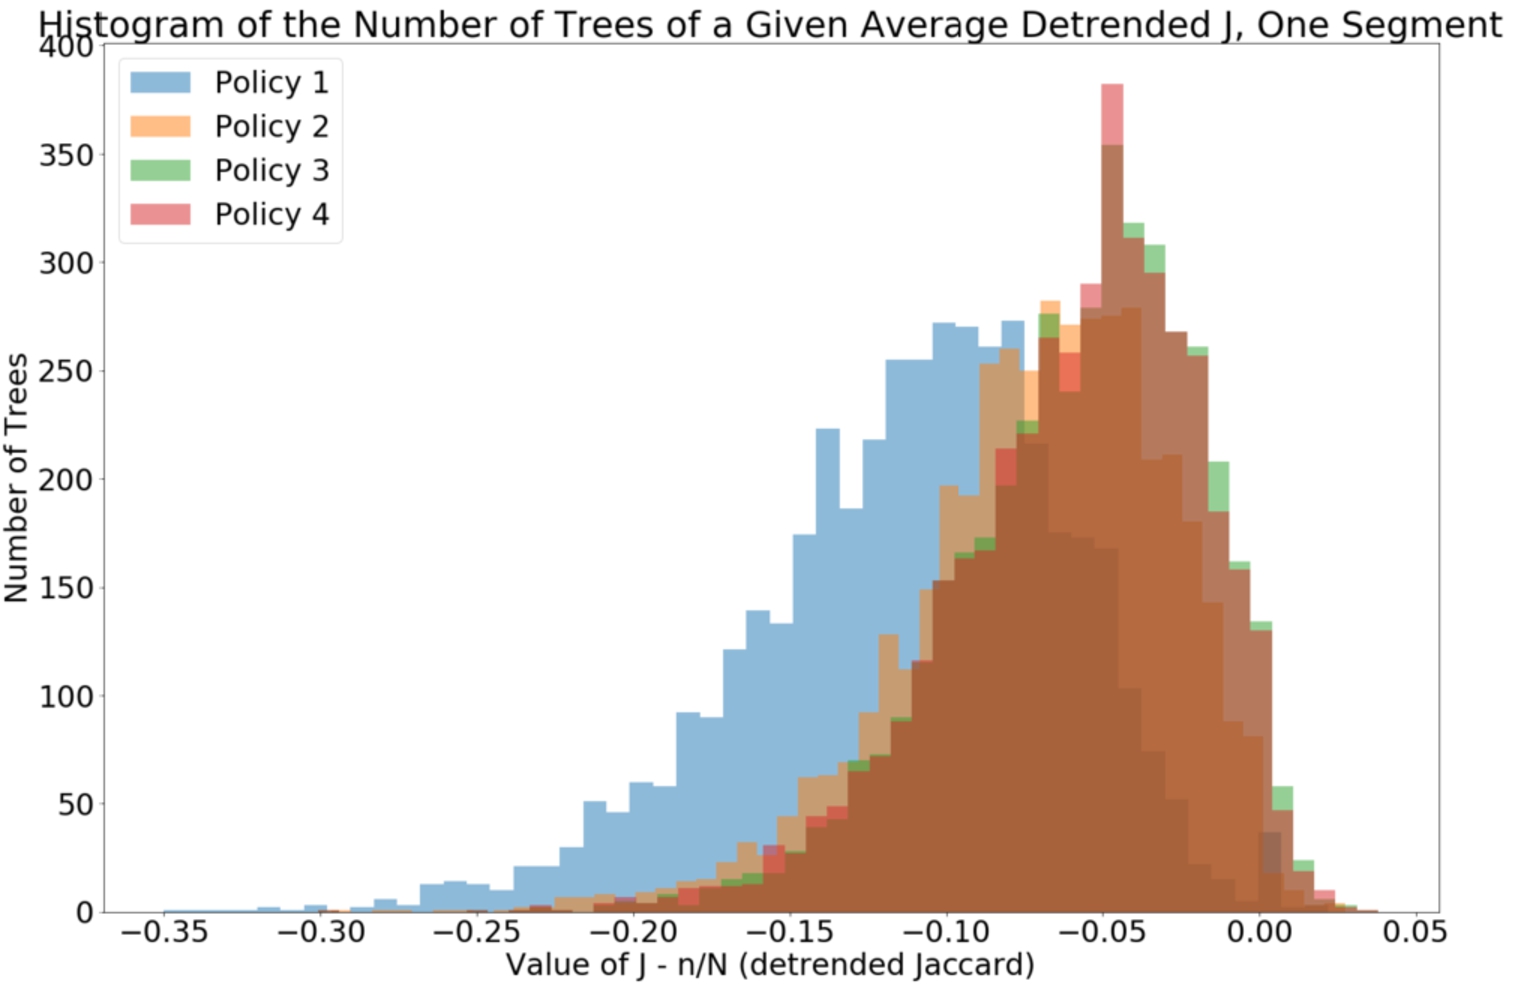 The DJn distributions for all policies averaged over nN (“one segment”), for all 4,365 trees.